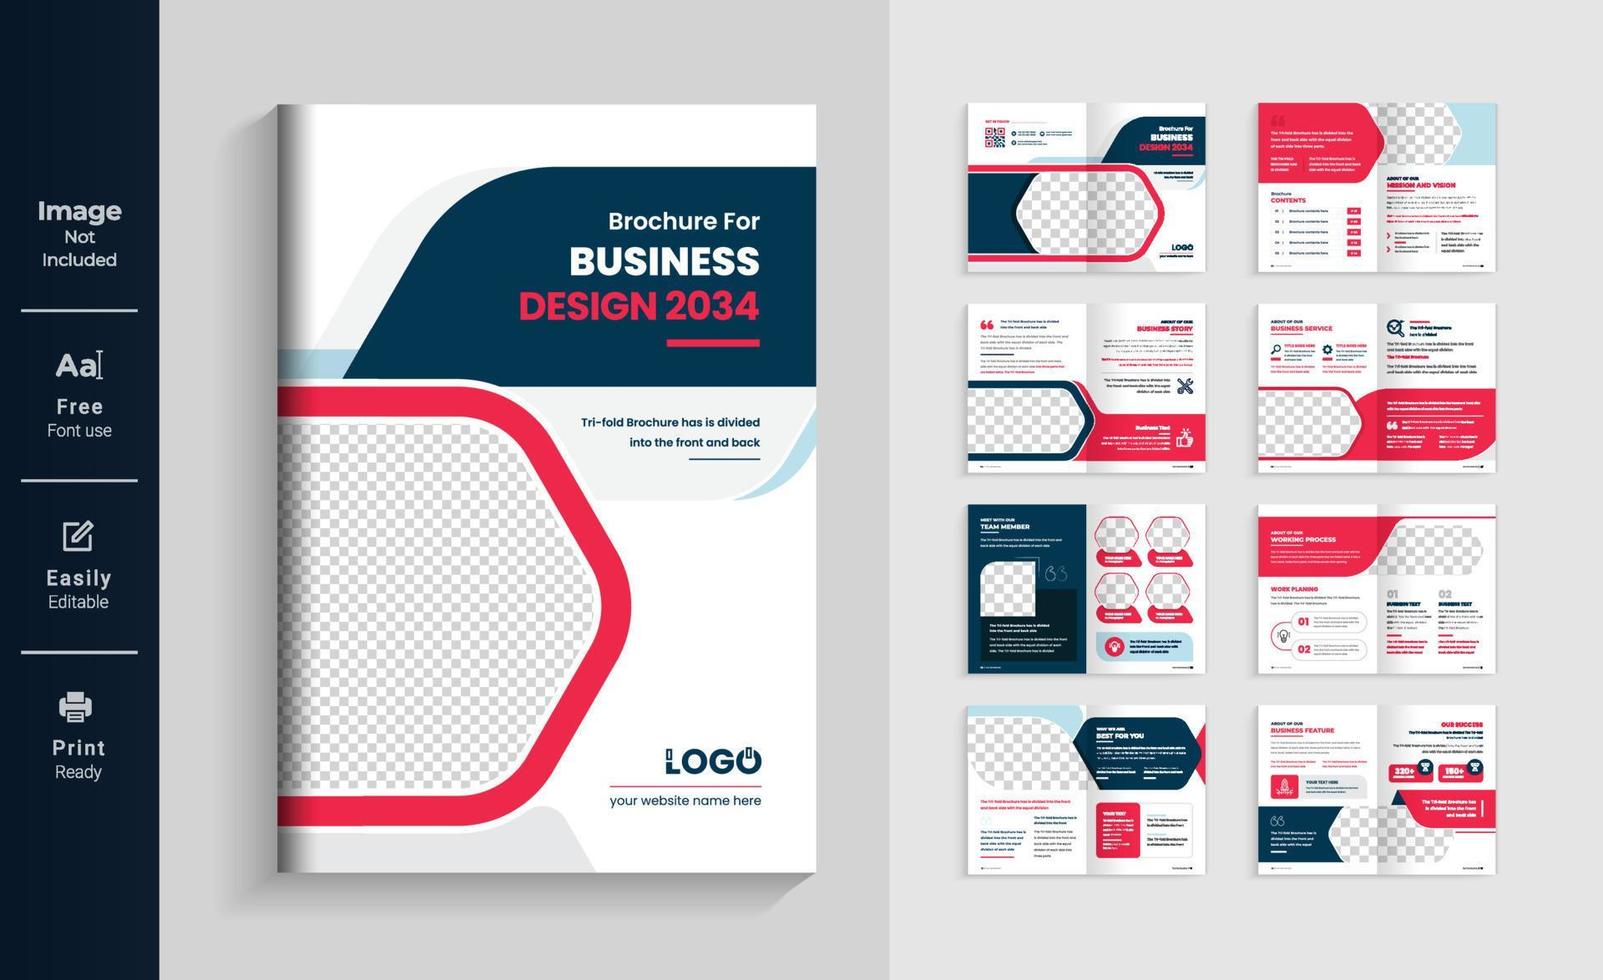 16 pages brochure template. profile pages layout design, modern colorful shape minimalist business brochure or annual report template abstract design theme vector